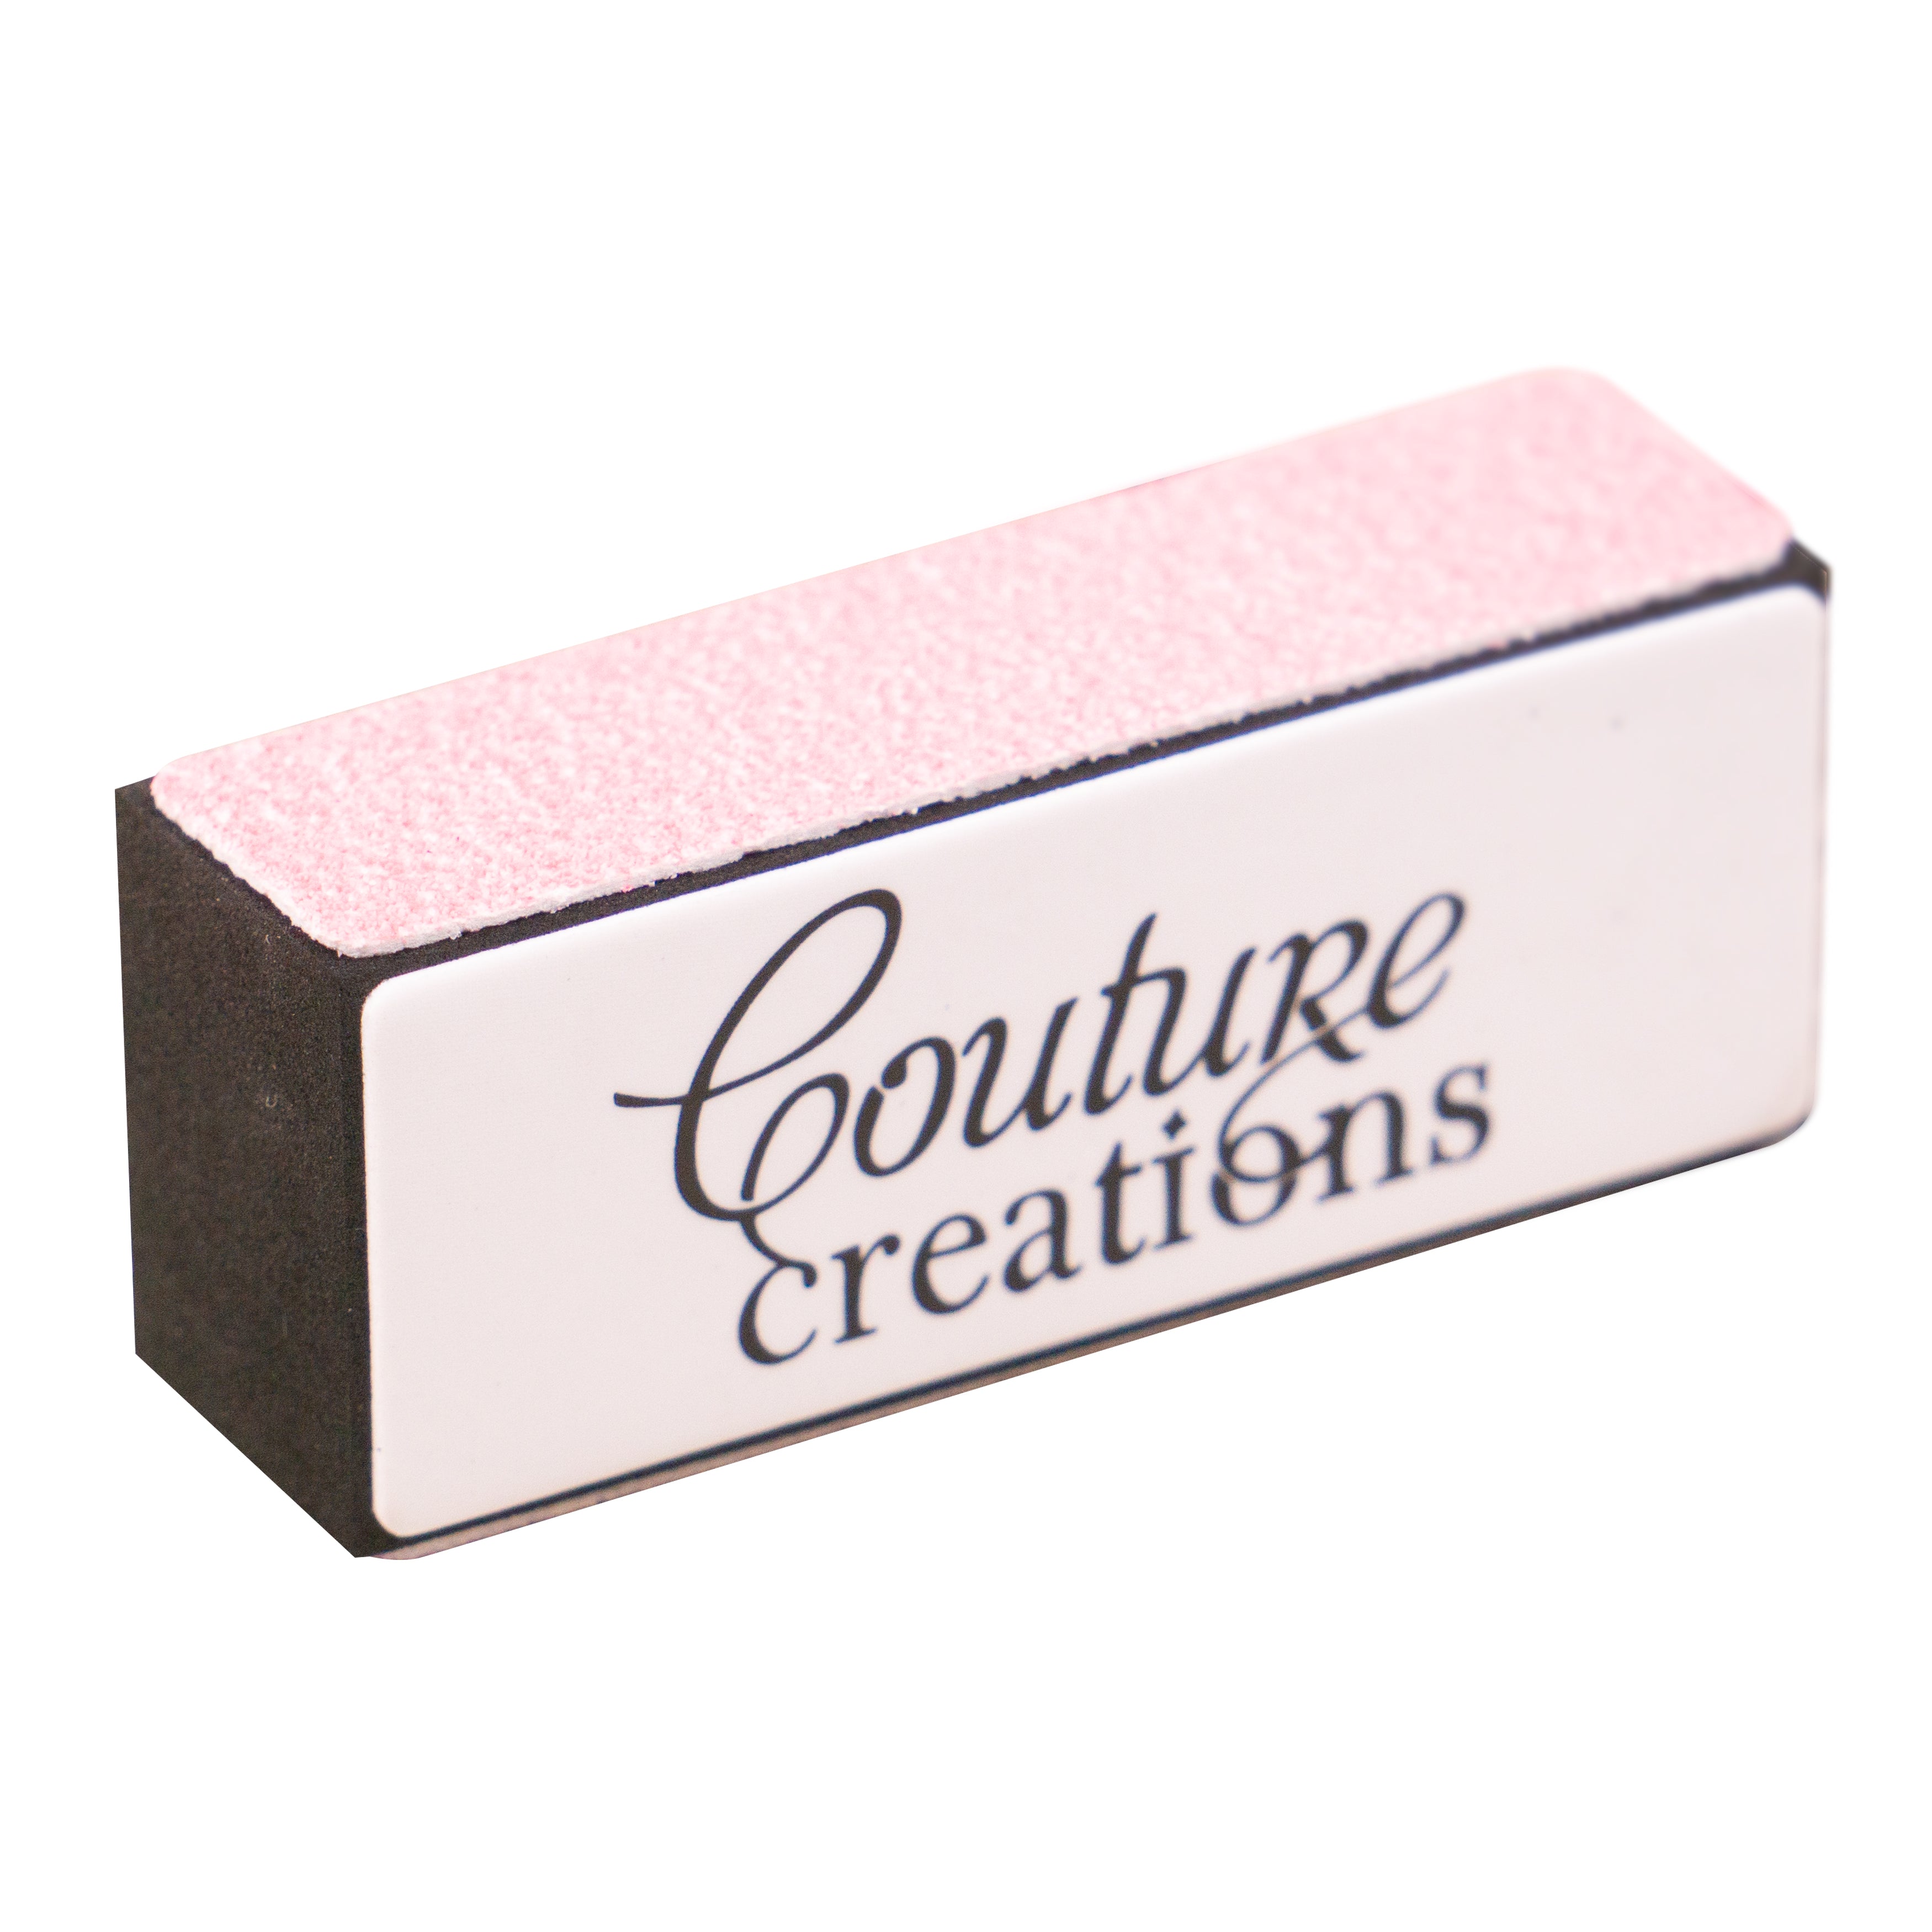 Couture Creations - Heat Tool for Crafting